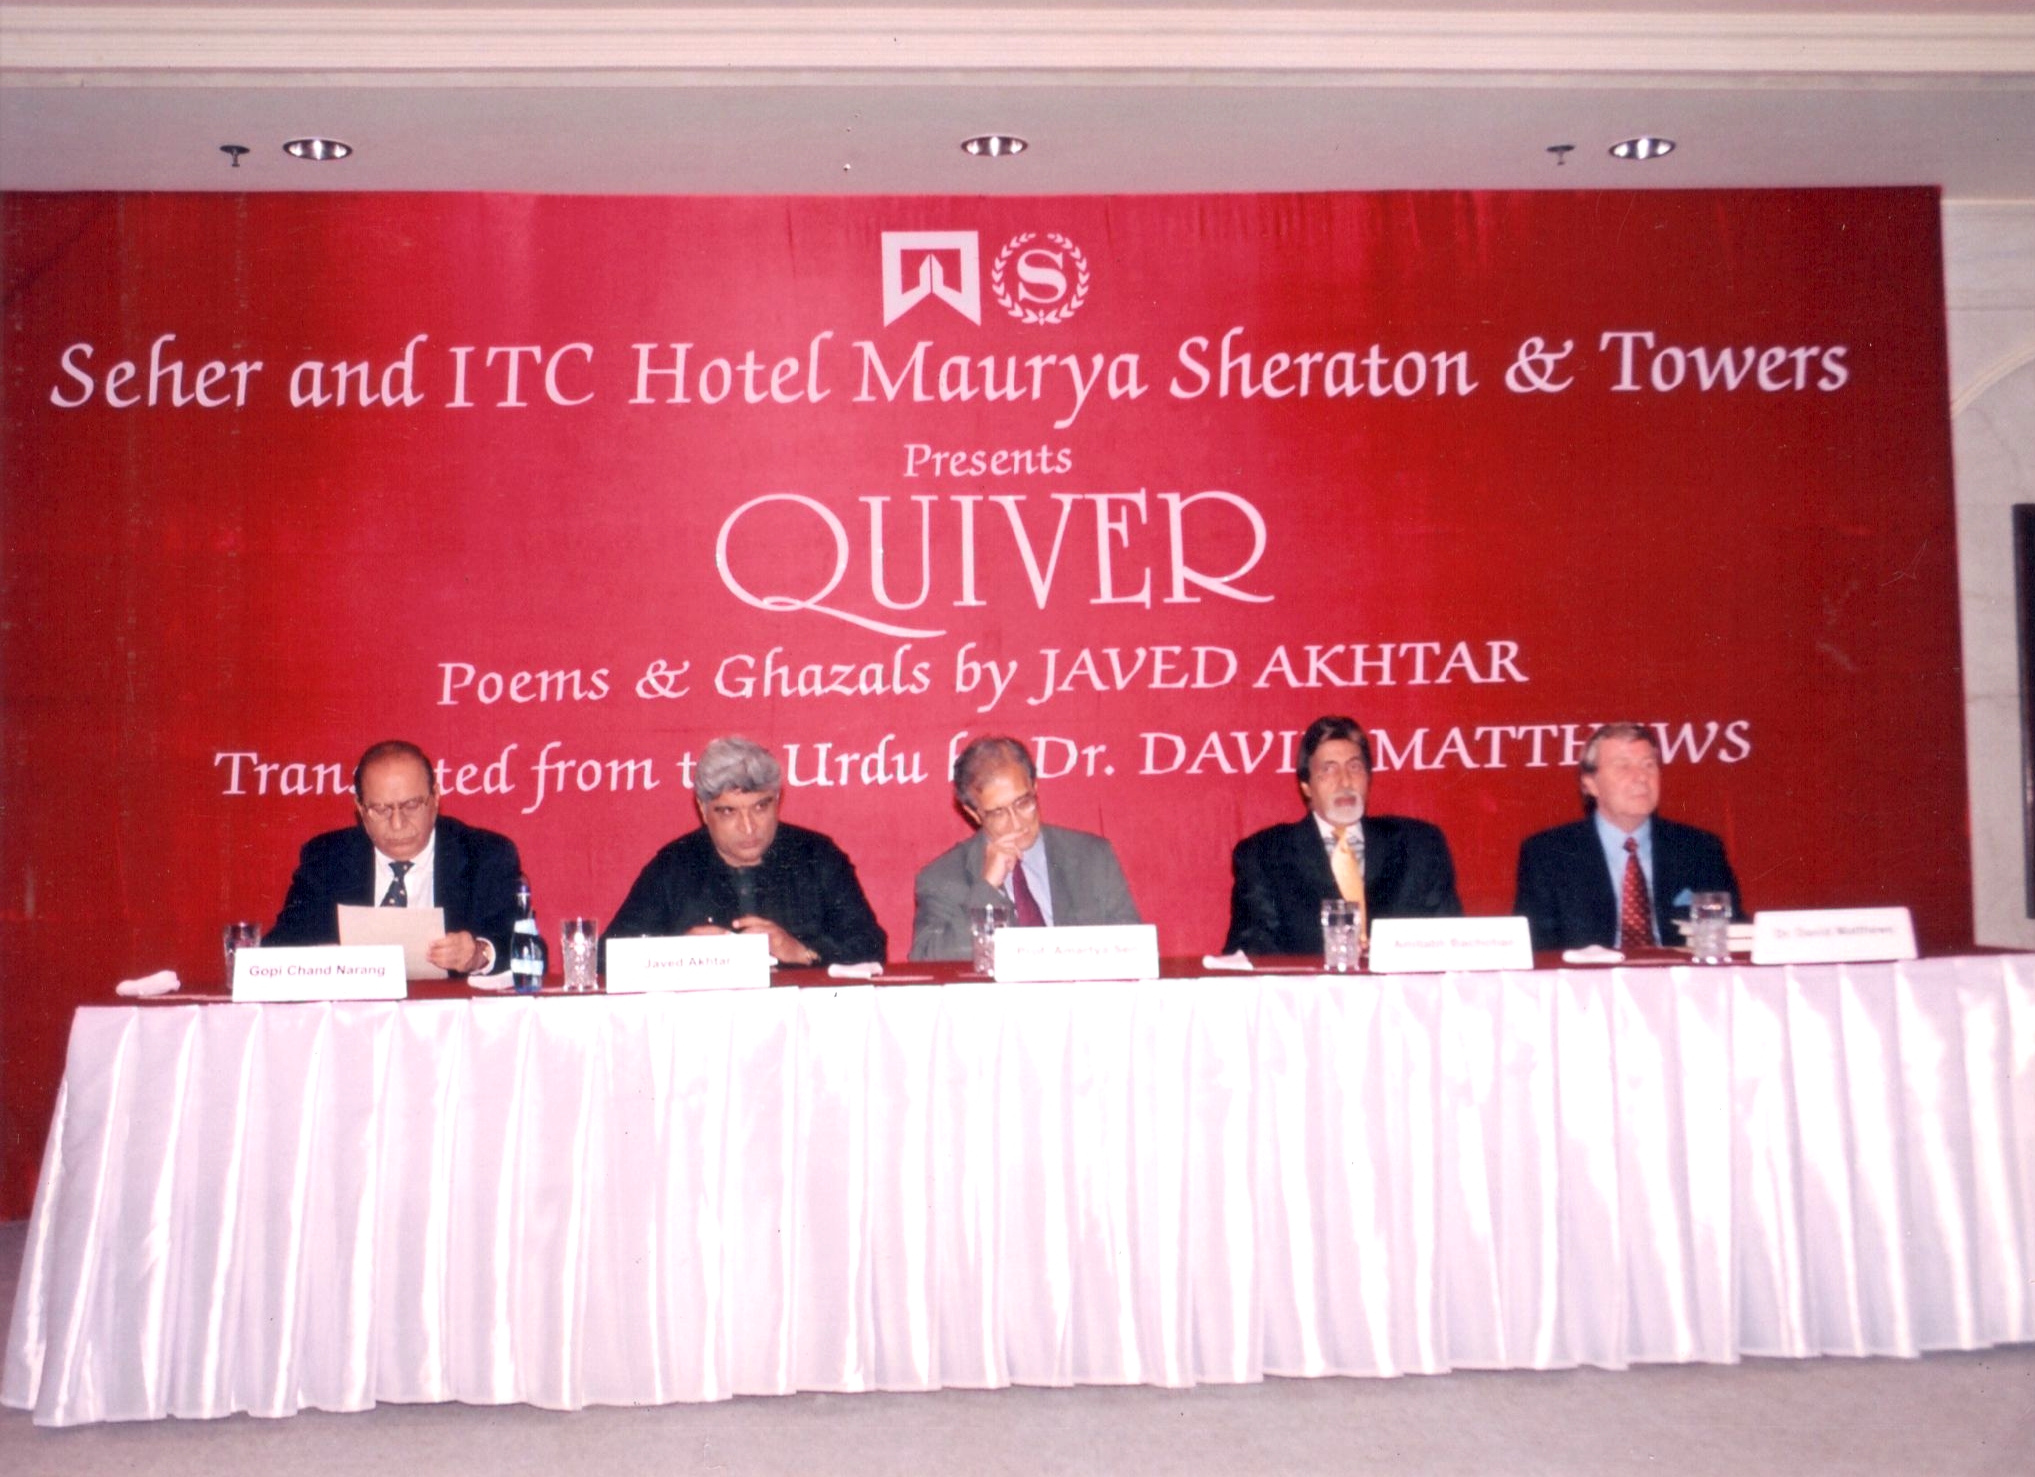 Javed Akhtar’s Book Launch ‘QUIVER’ organised by Seher with Dr. Amartya Sen as the guest of honour,2001